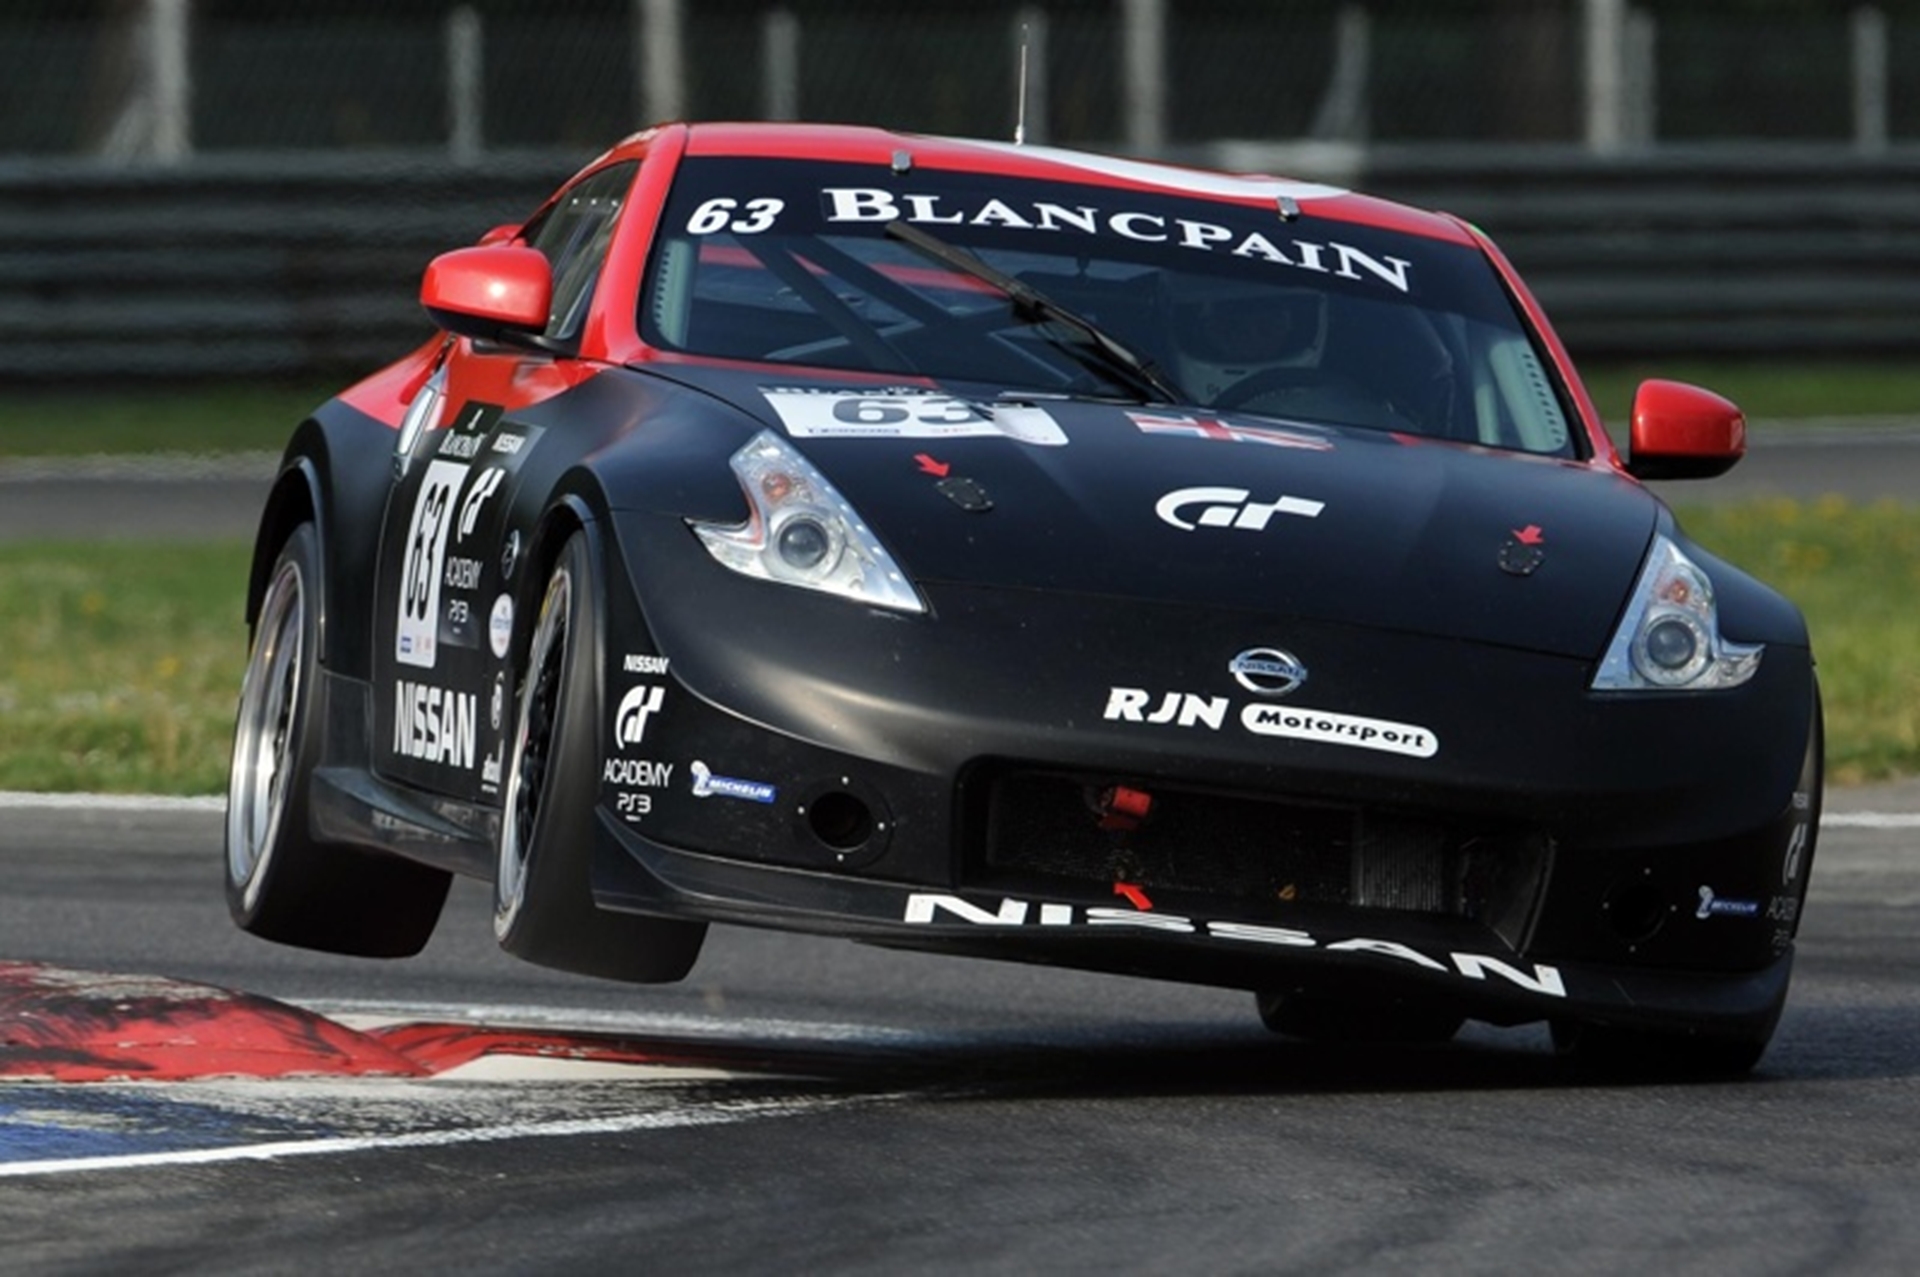 SUCCESSFUL GAMER-TO-RACER GT ACADEMY PROGRAMME EXPANDS FOR 2012